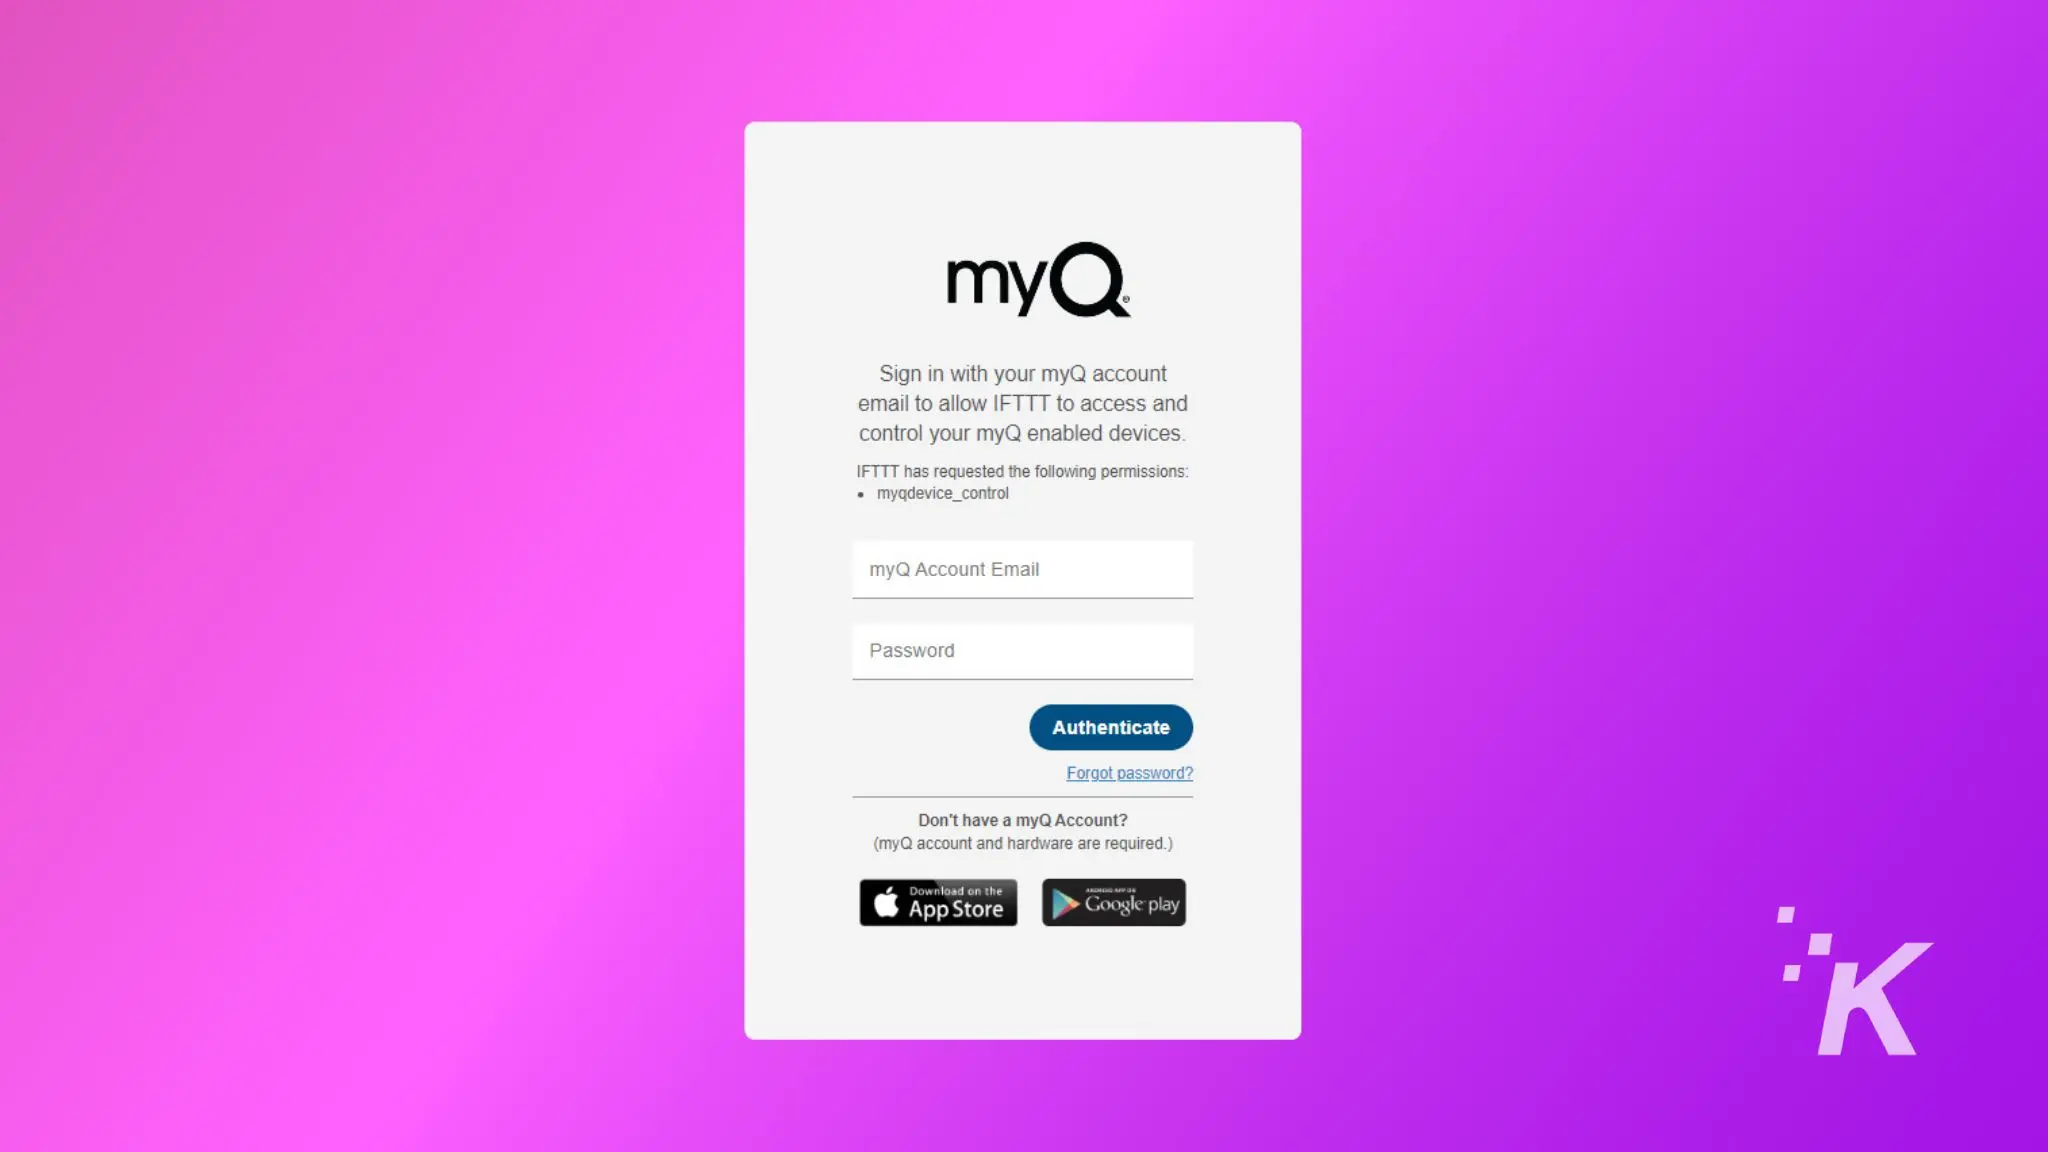 This image is prompting the user to sign in to their myQ account with their email and password in order to grant IFTTT access and control of their myQ enabled devices.